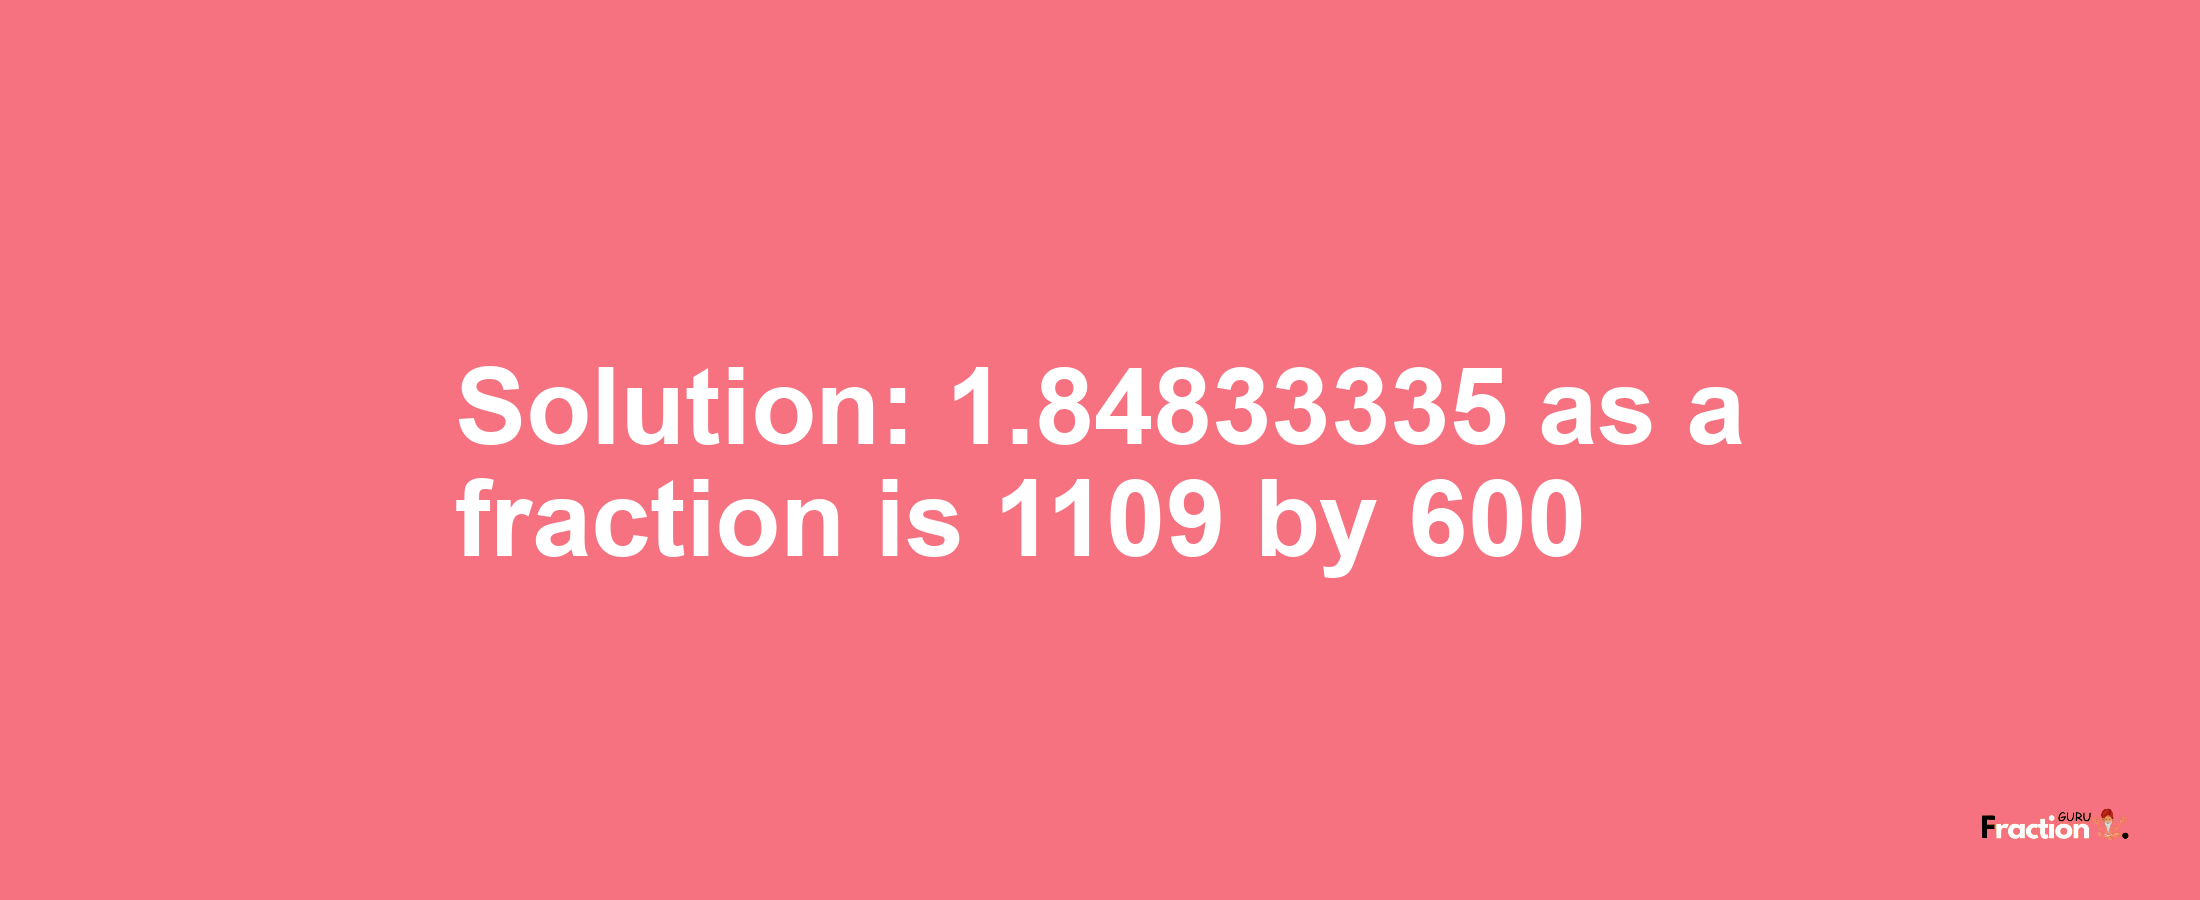 Solution:1.84833335 as a fraction is 1109/600